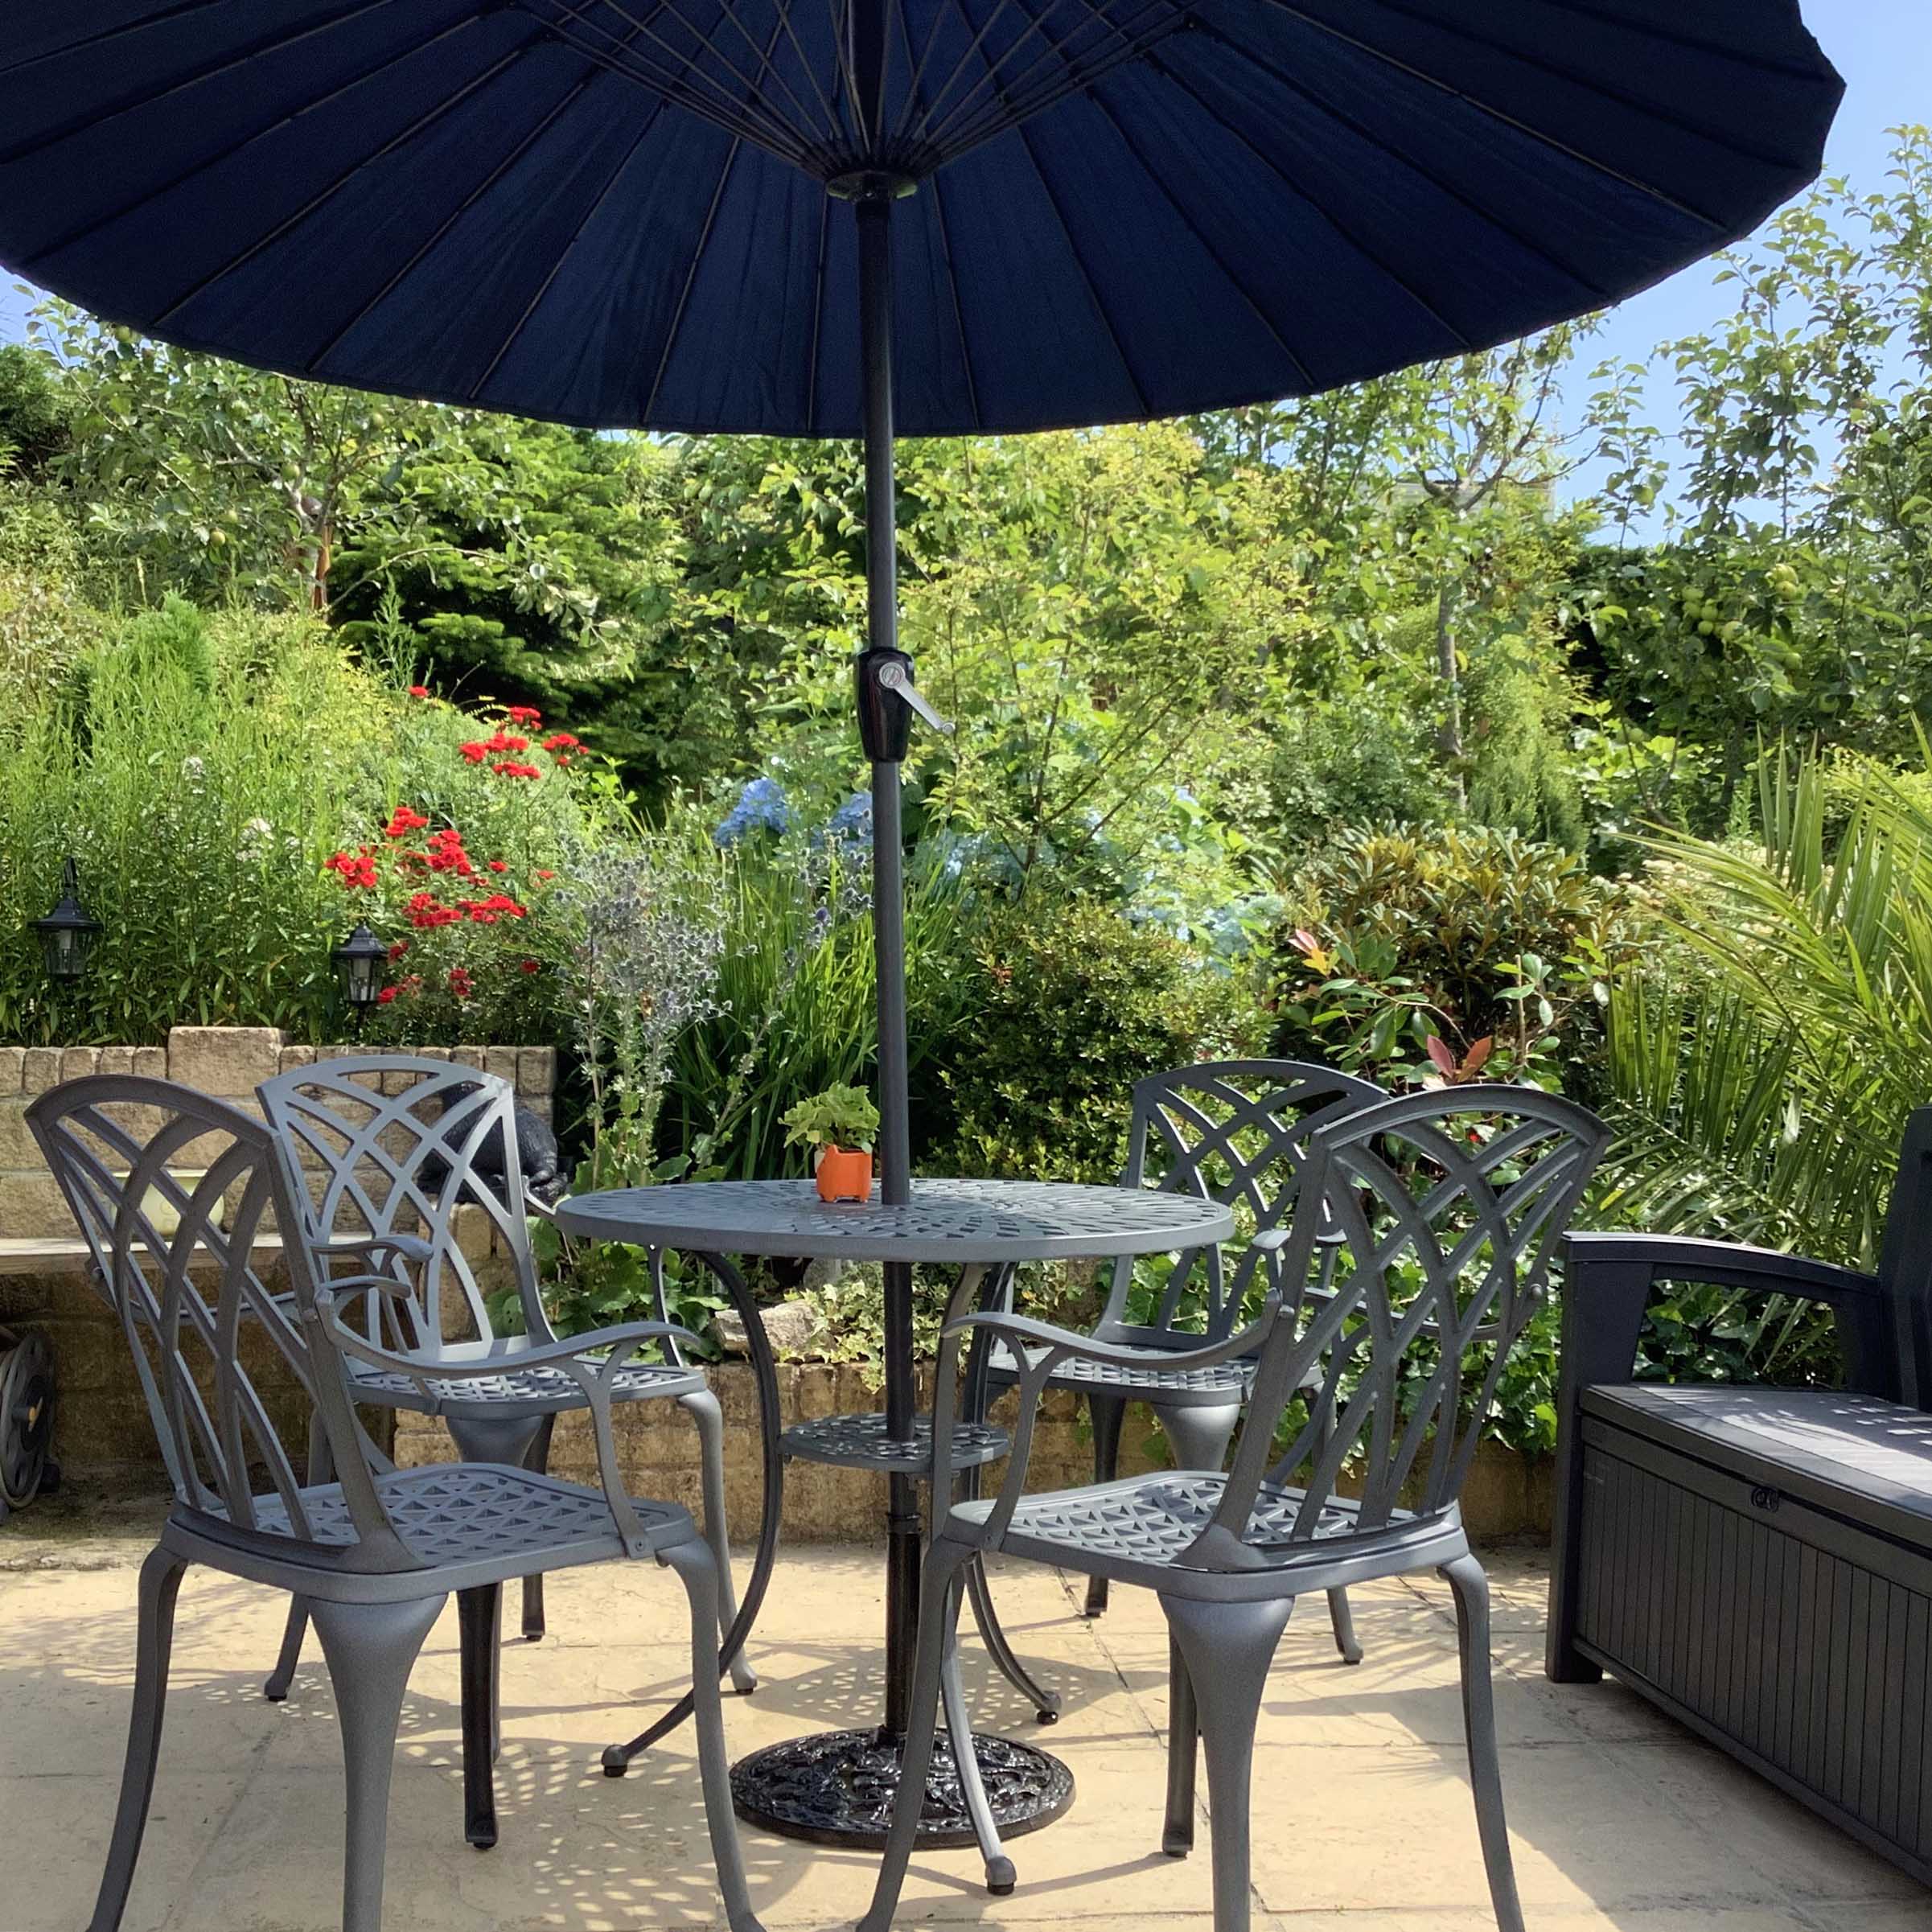 Our Mia Garden Table in Slate look stunning in this country garden